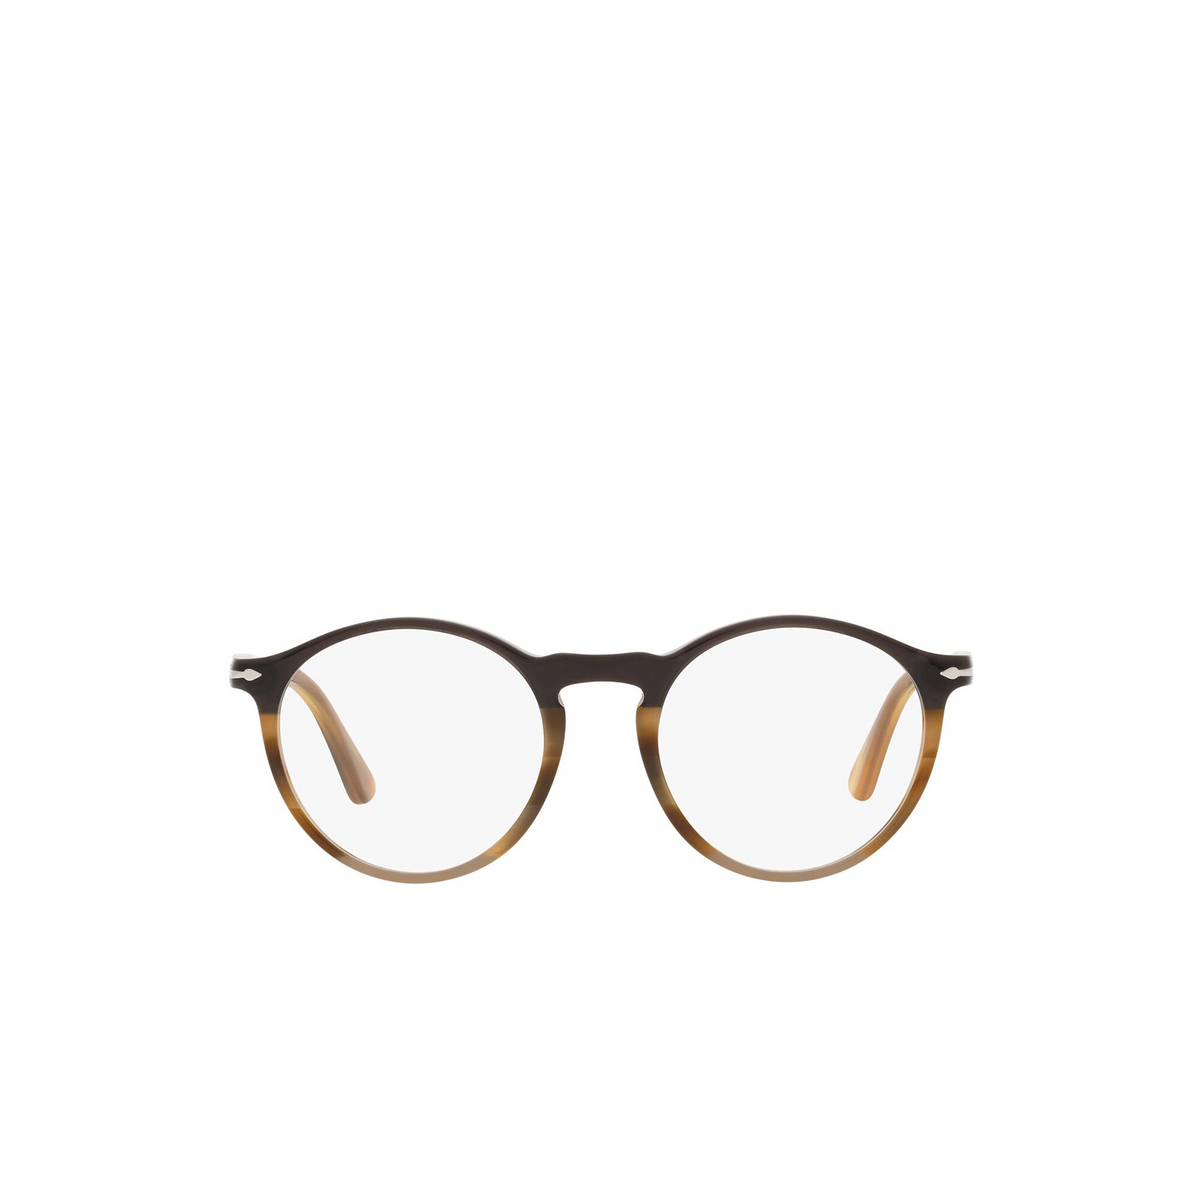 Persol® Round Eyeglasses: PO3285V color Black / Striped Brown / Grey 1135 - front view.